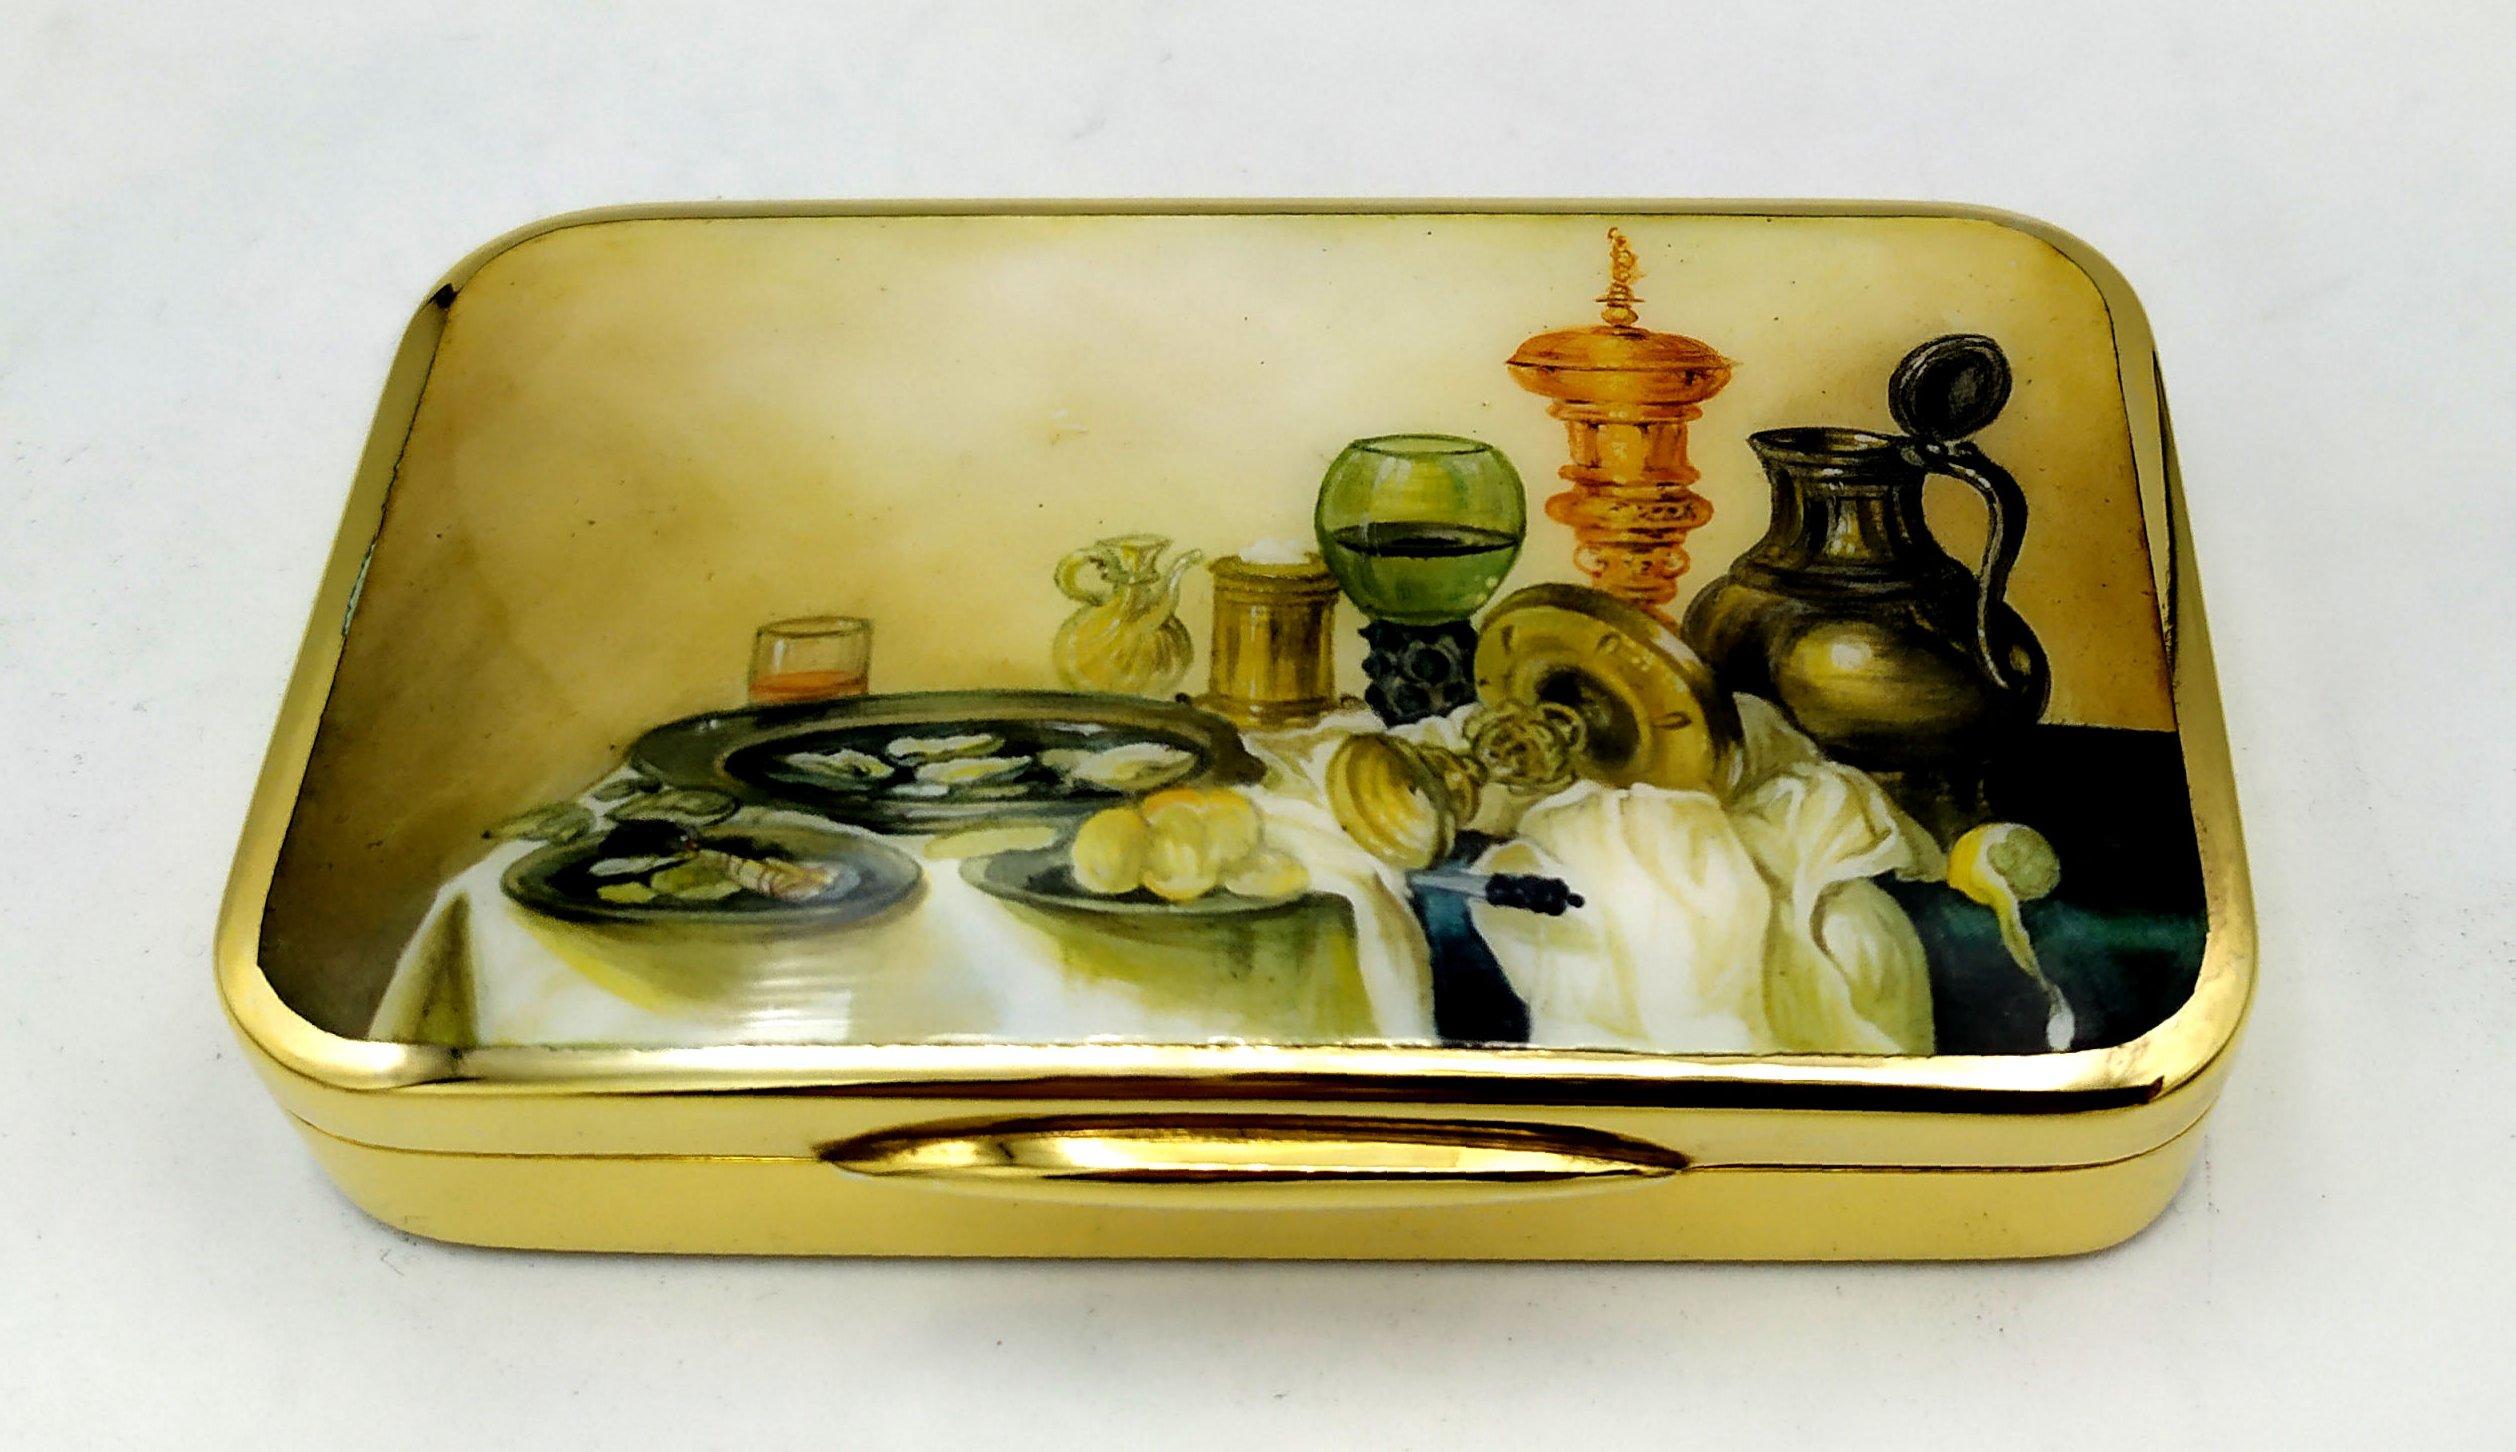 Rectangular table cigarette case with rounded corners in sterling silver 925/1000 gold plated with beautiful miniature fire enamelled and hand painted by the painter Beatrice Mellana reproducing a 